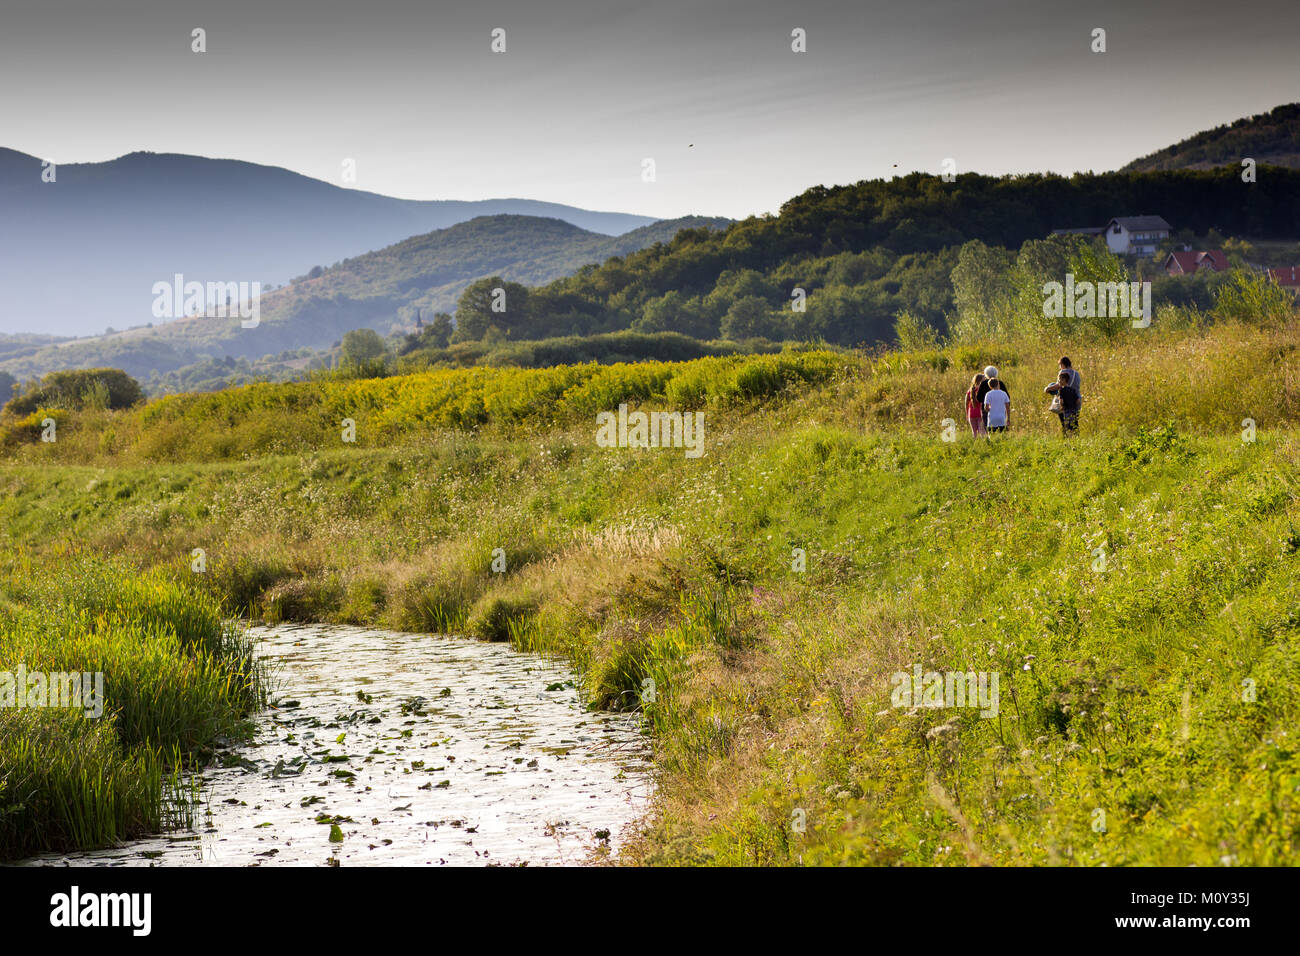 Old Gacka river passing through green mountainous countryside with small group of people (including children) walking along the grassy bank Stock Photo